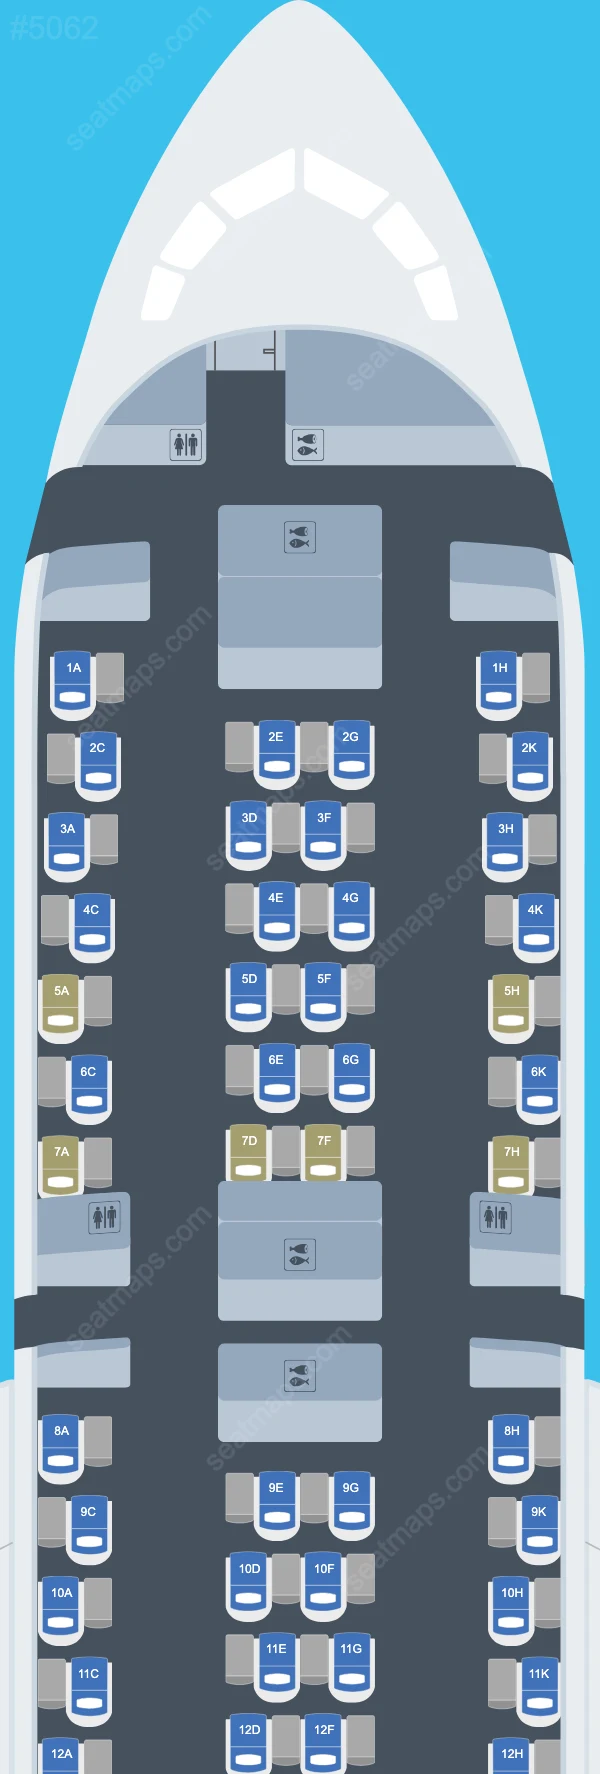 ANA (All Nippon Airways) Boeing 787-9 V.2 seatmap mobile preview